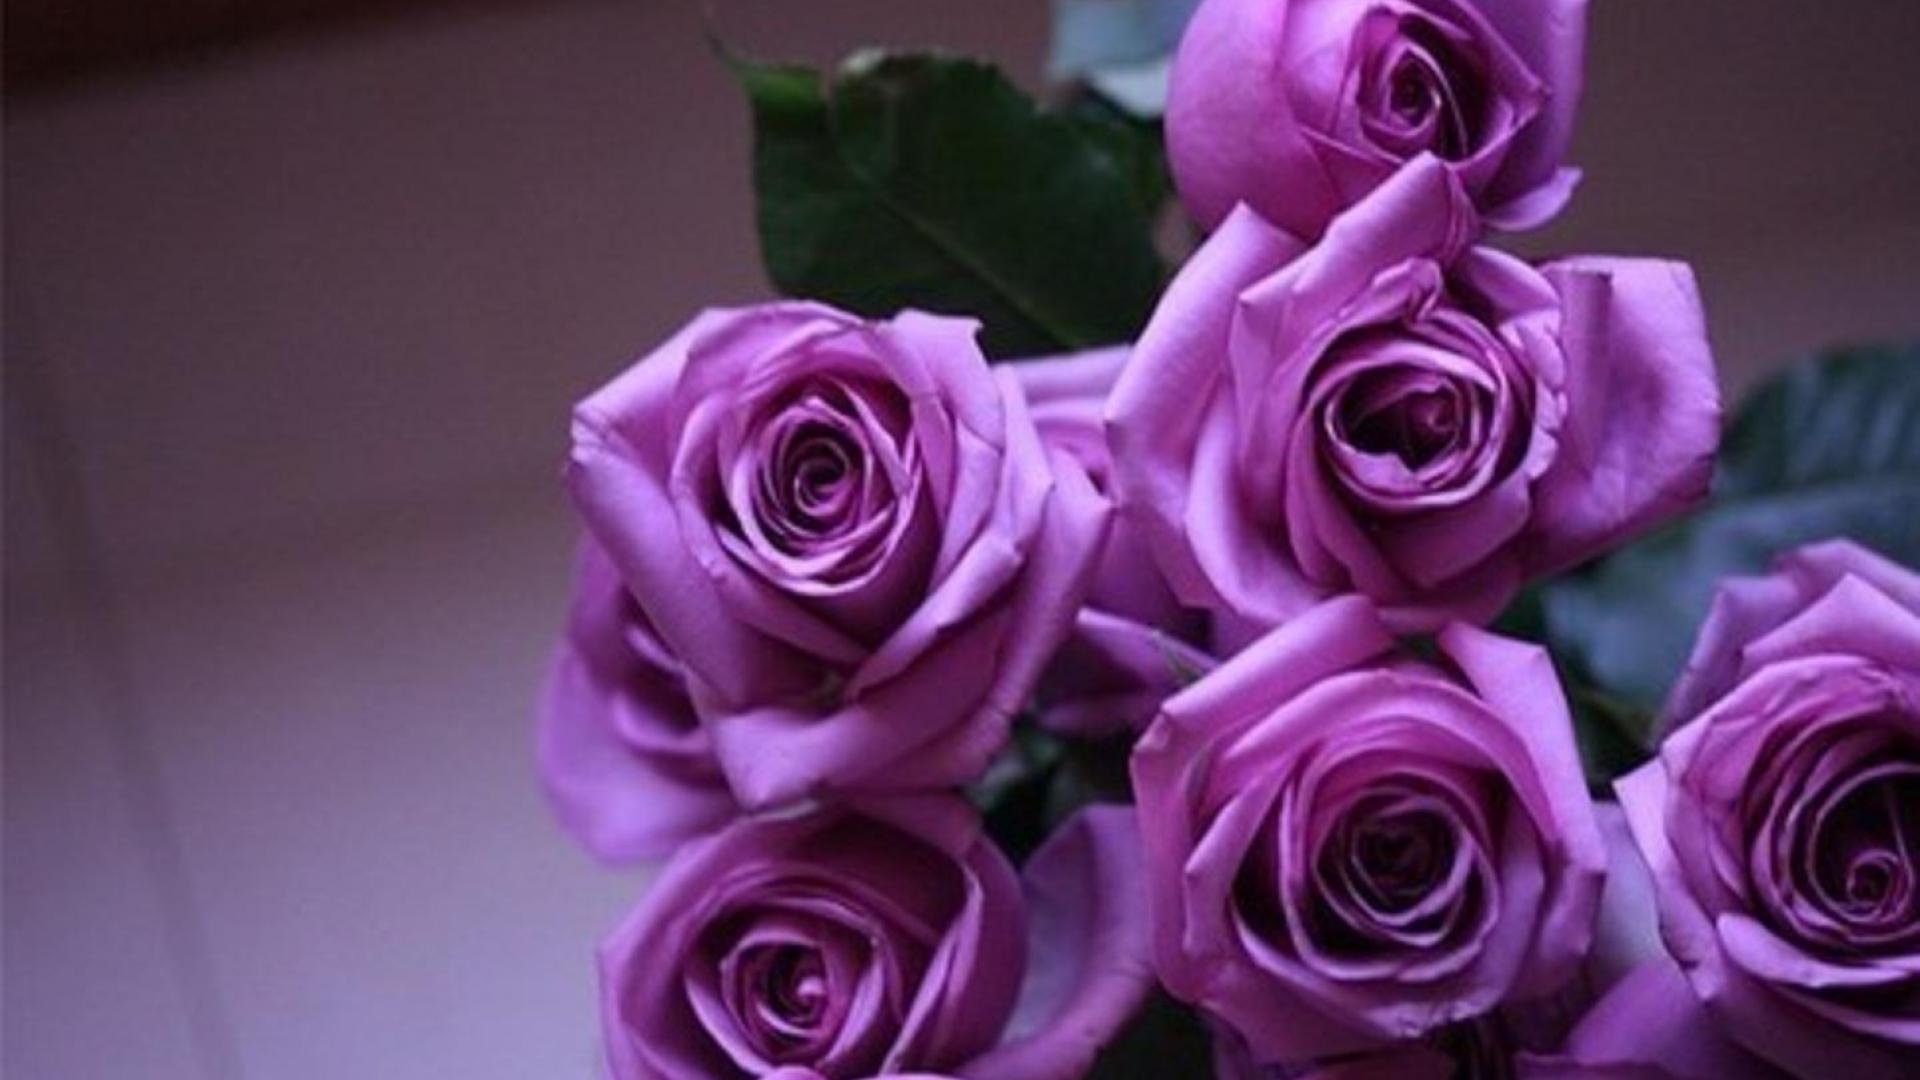 Purple Roses Wallpaper High Definition Quality Widescreen